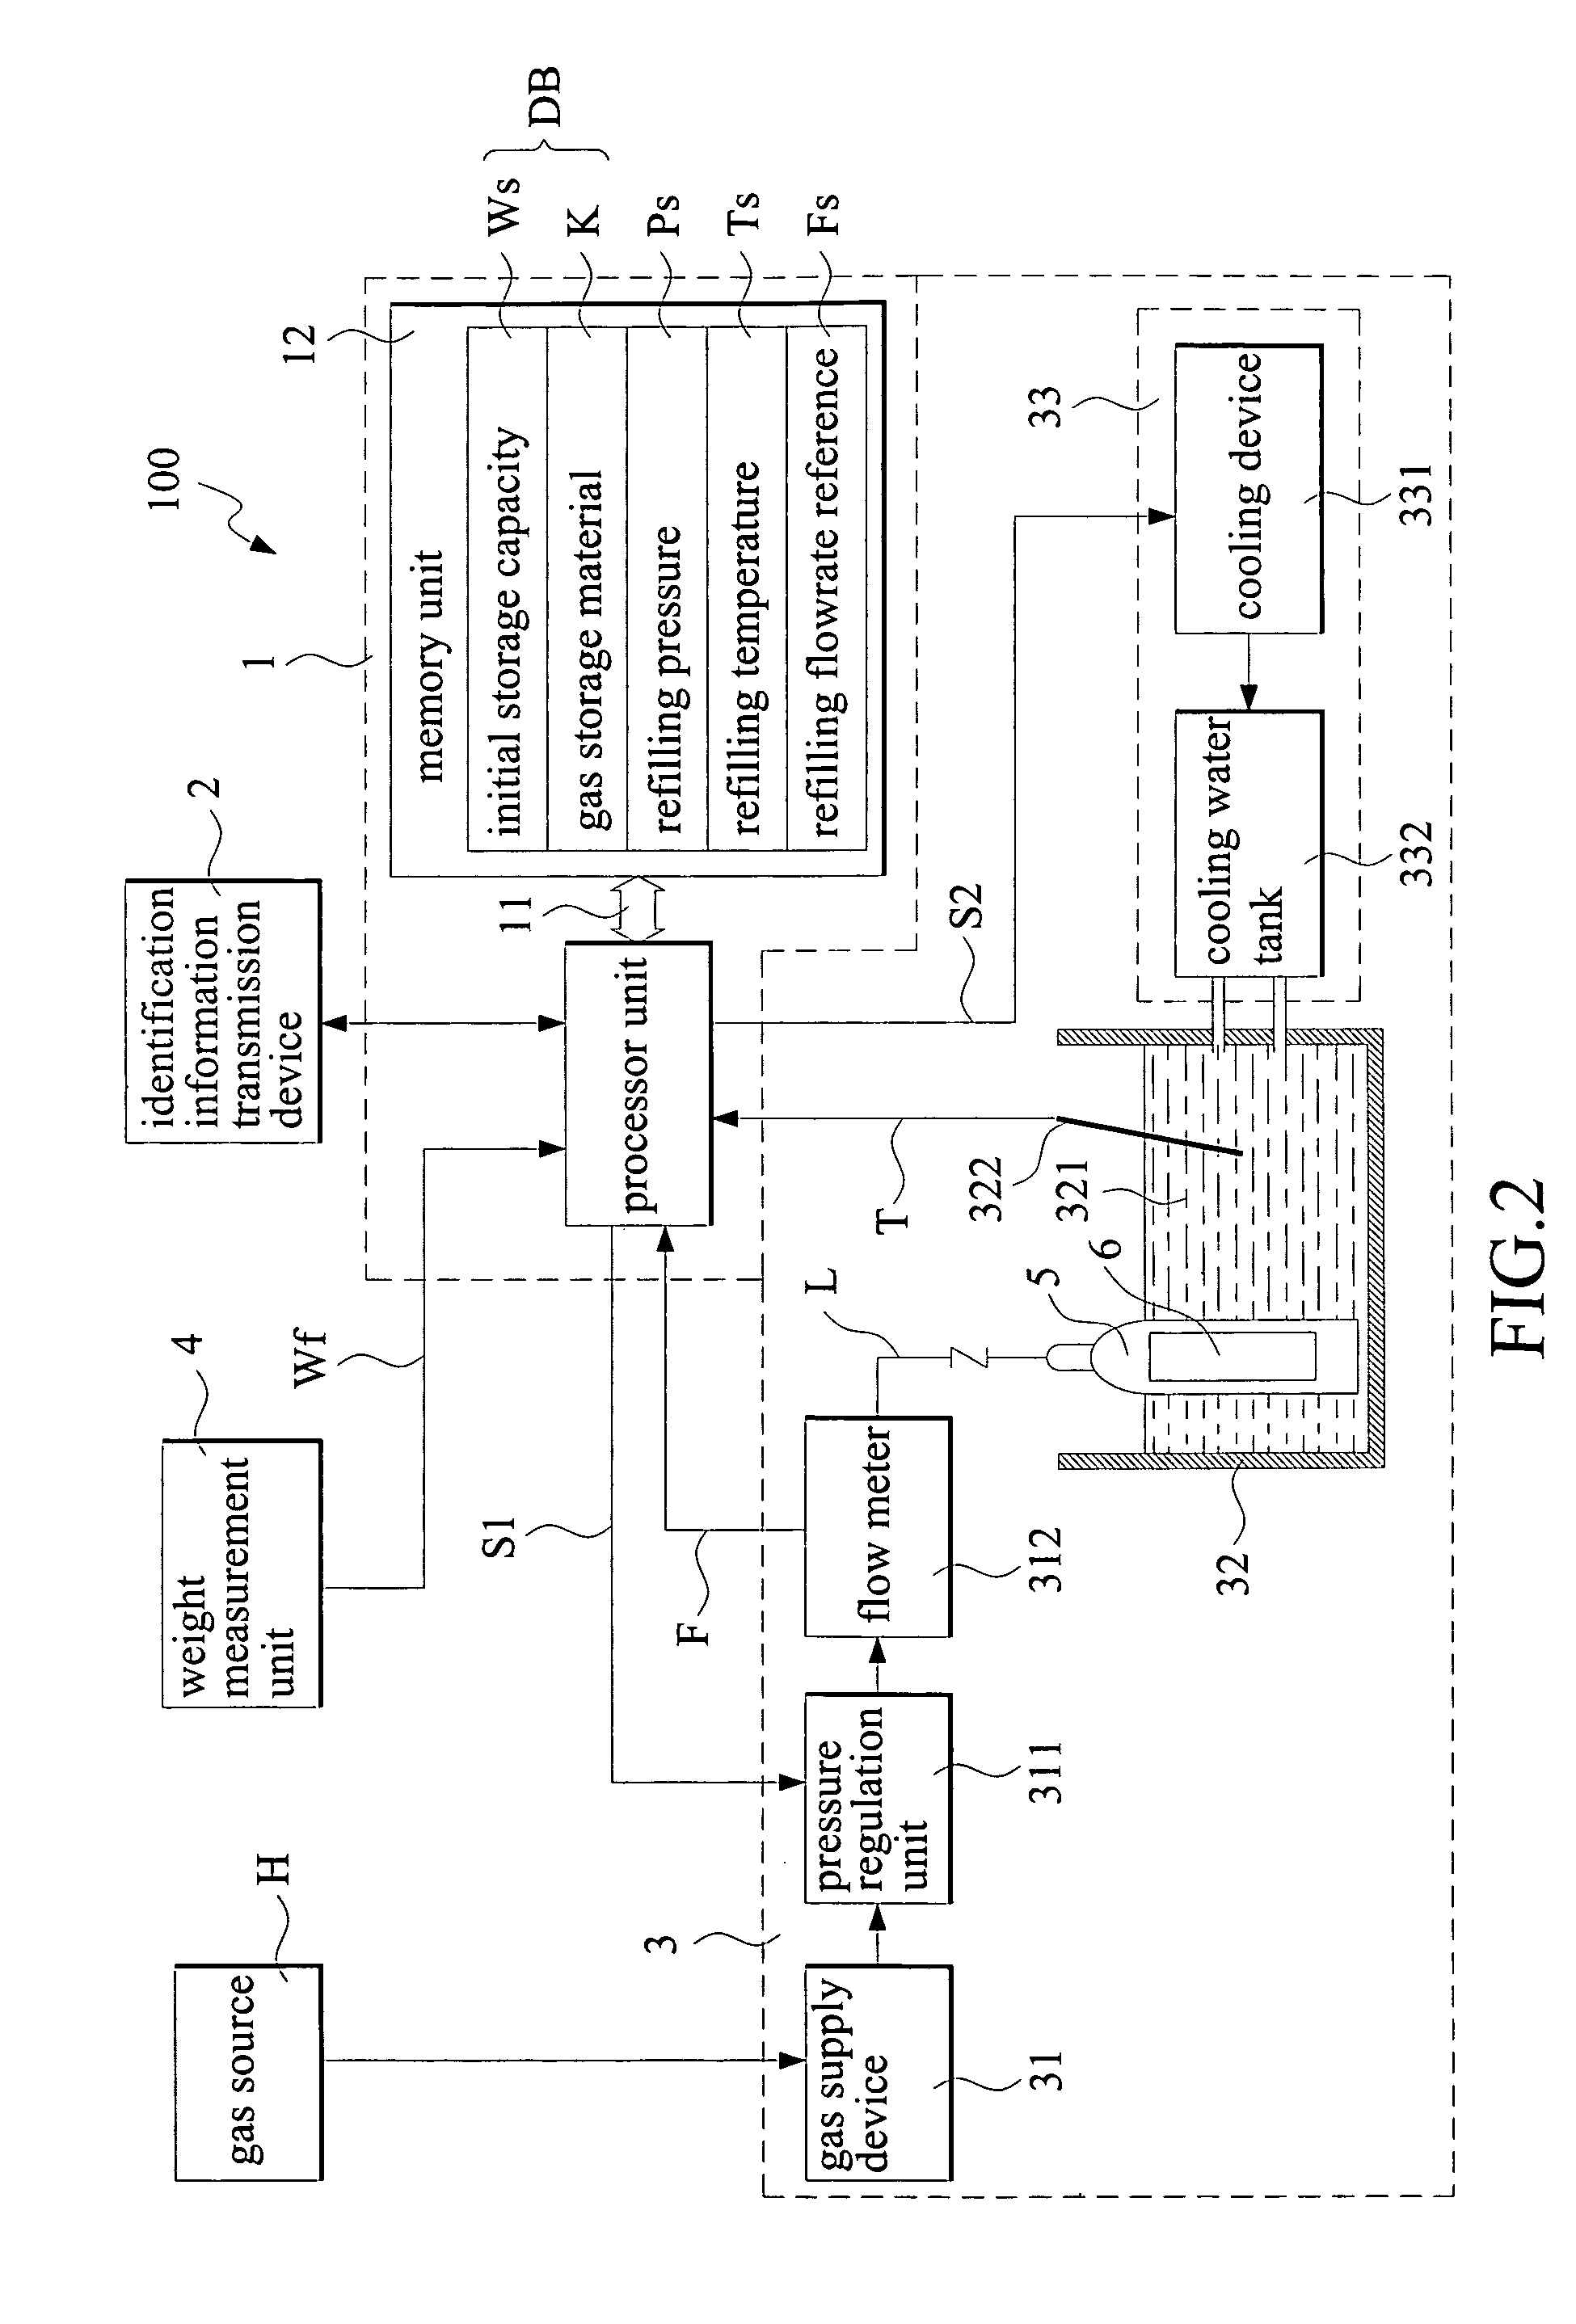 Method and system of gas refilling management for gas storage canister utilizing identification accessing control